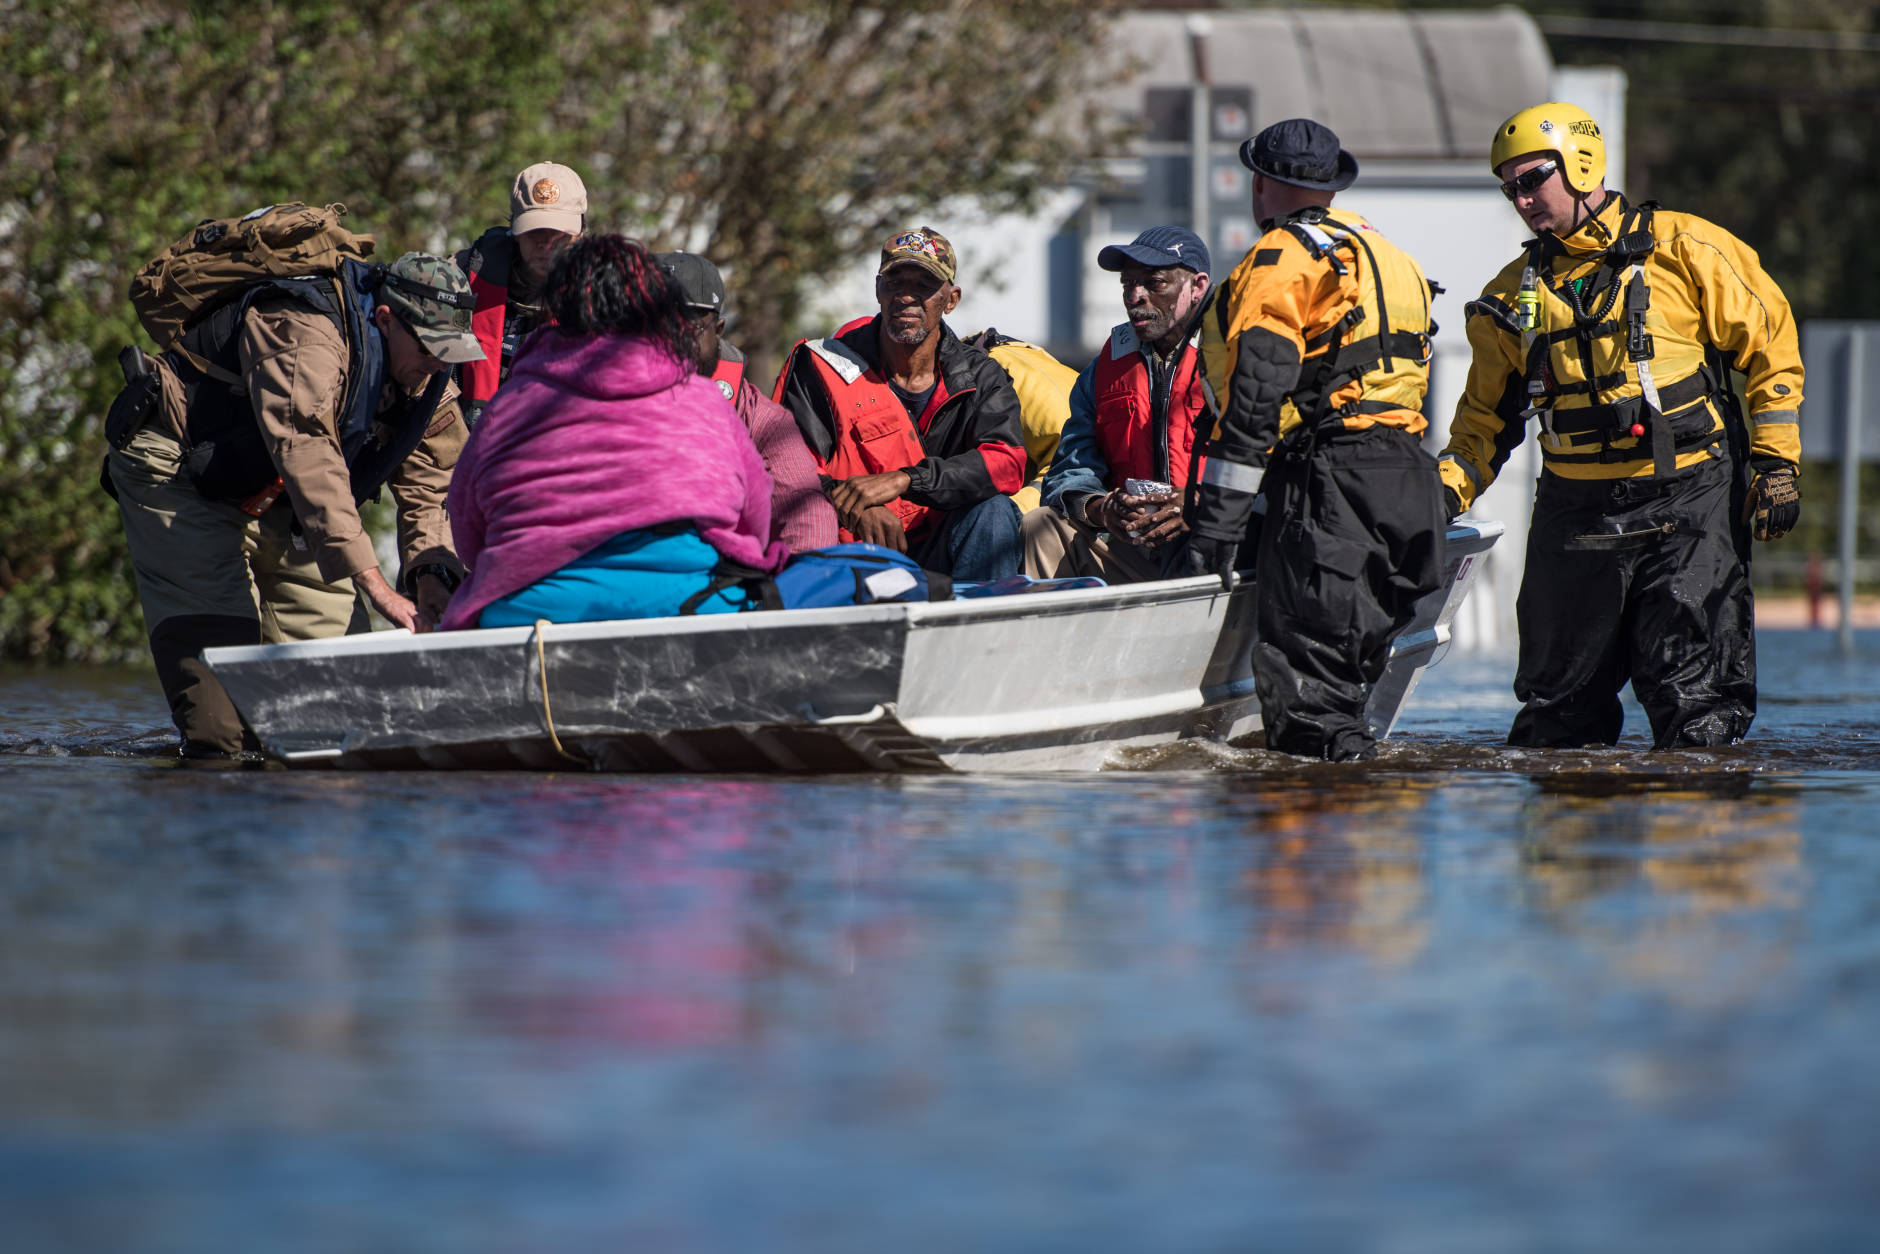 LUMBERTON, NC - OCTOBER 12: A rescue team transports residents to dry land on October 12, 2016 in Lumberton, North Carolina. Hurricane Matthew's heavy rains ended over the weekend, but flooding is still expected for days in North Carolina. (Photo by Sean Rayford/Getty Images)